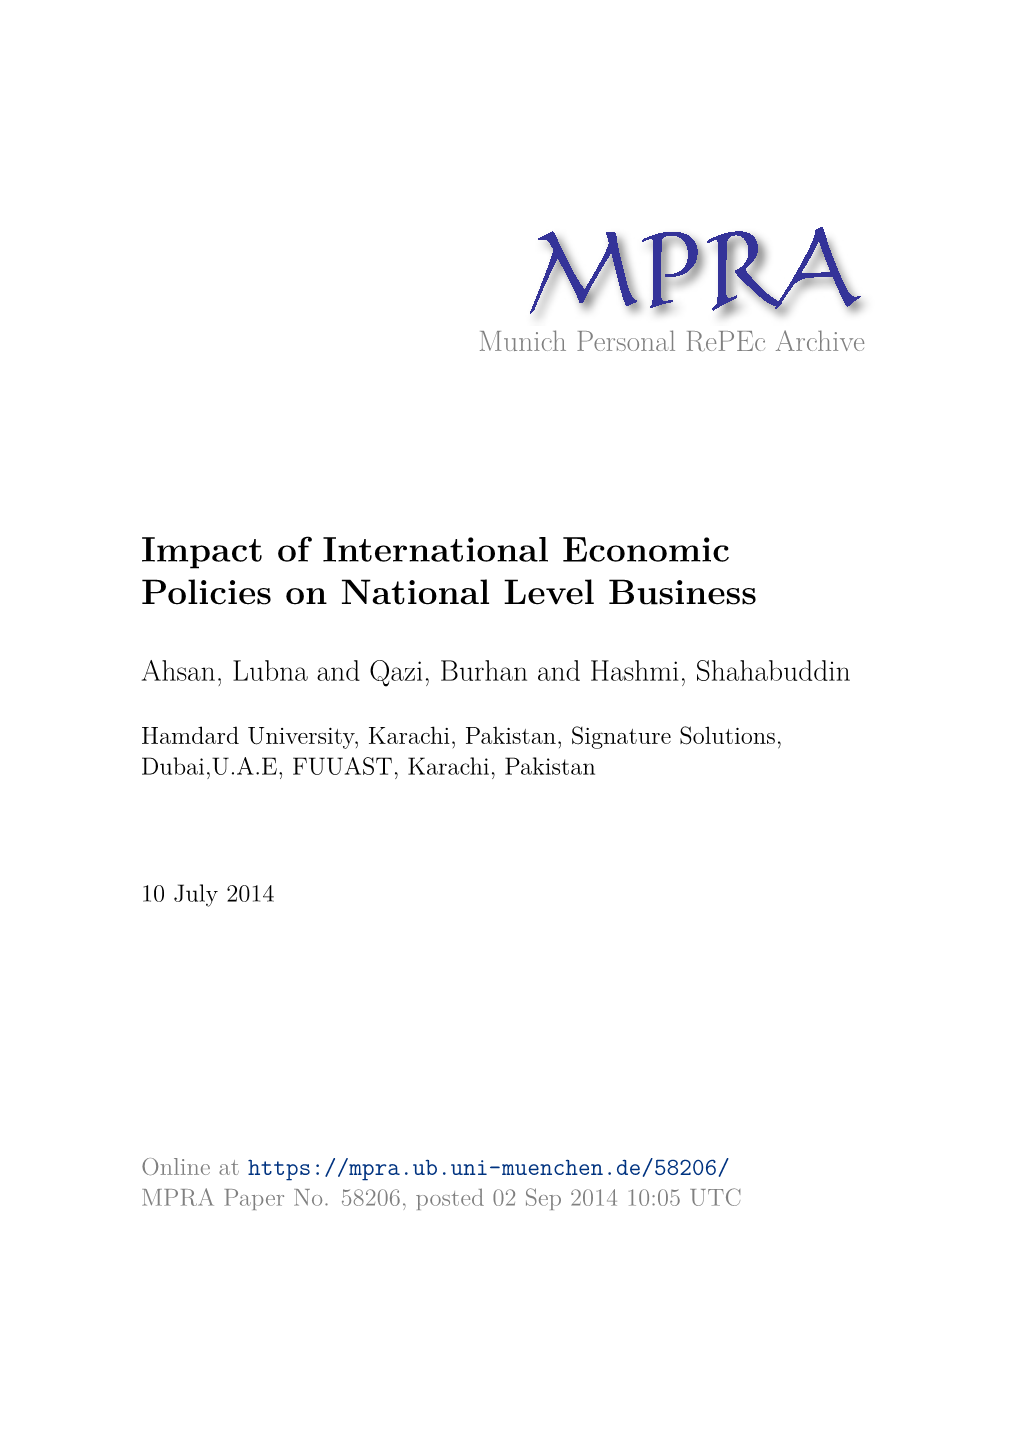 Impact of International Economic Policies on National Level Business